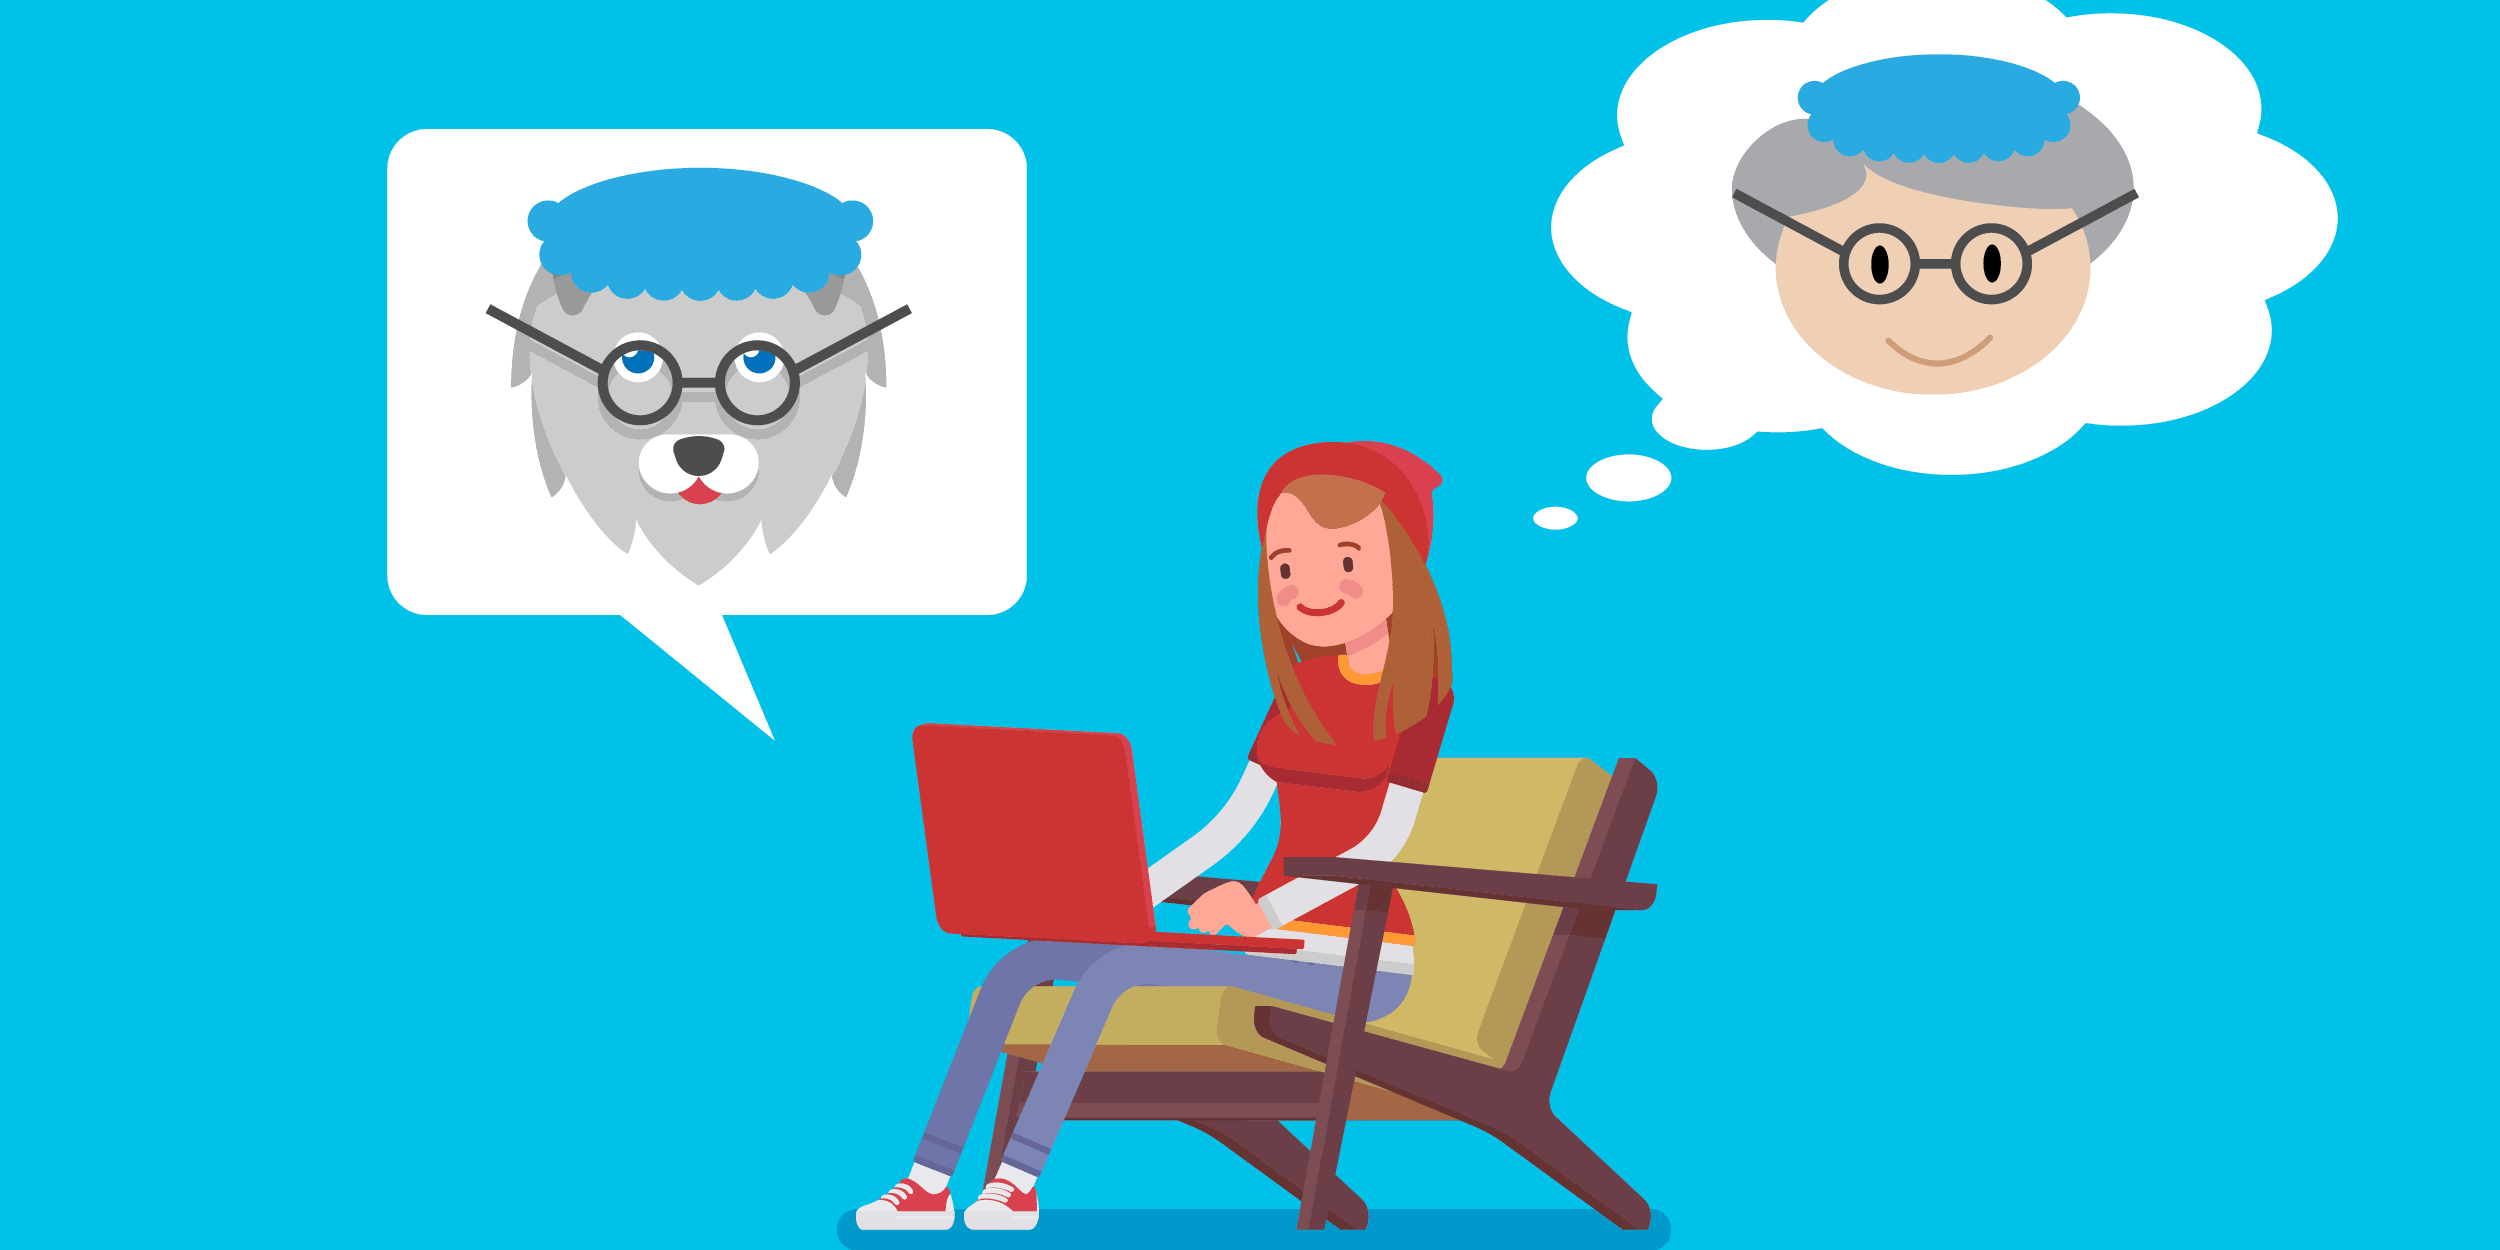 illustration of a woman wearing a red cap and a red shirt typing on a red laptop (a modern-day Little Red Riding Hood) and thinking about her real grandma but chatting online with a wolf dressed as a grandma (representing a cybercriminal or a fraudulent website)